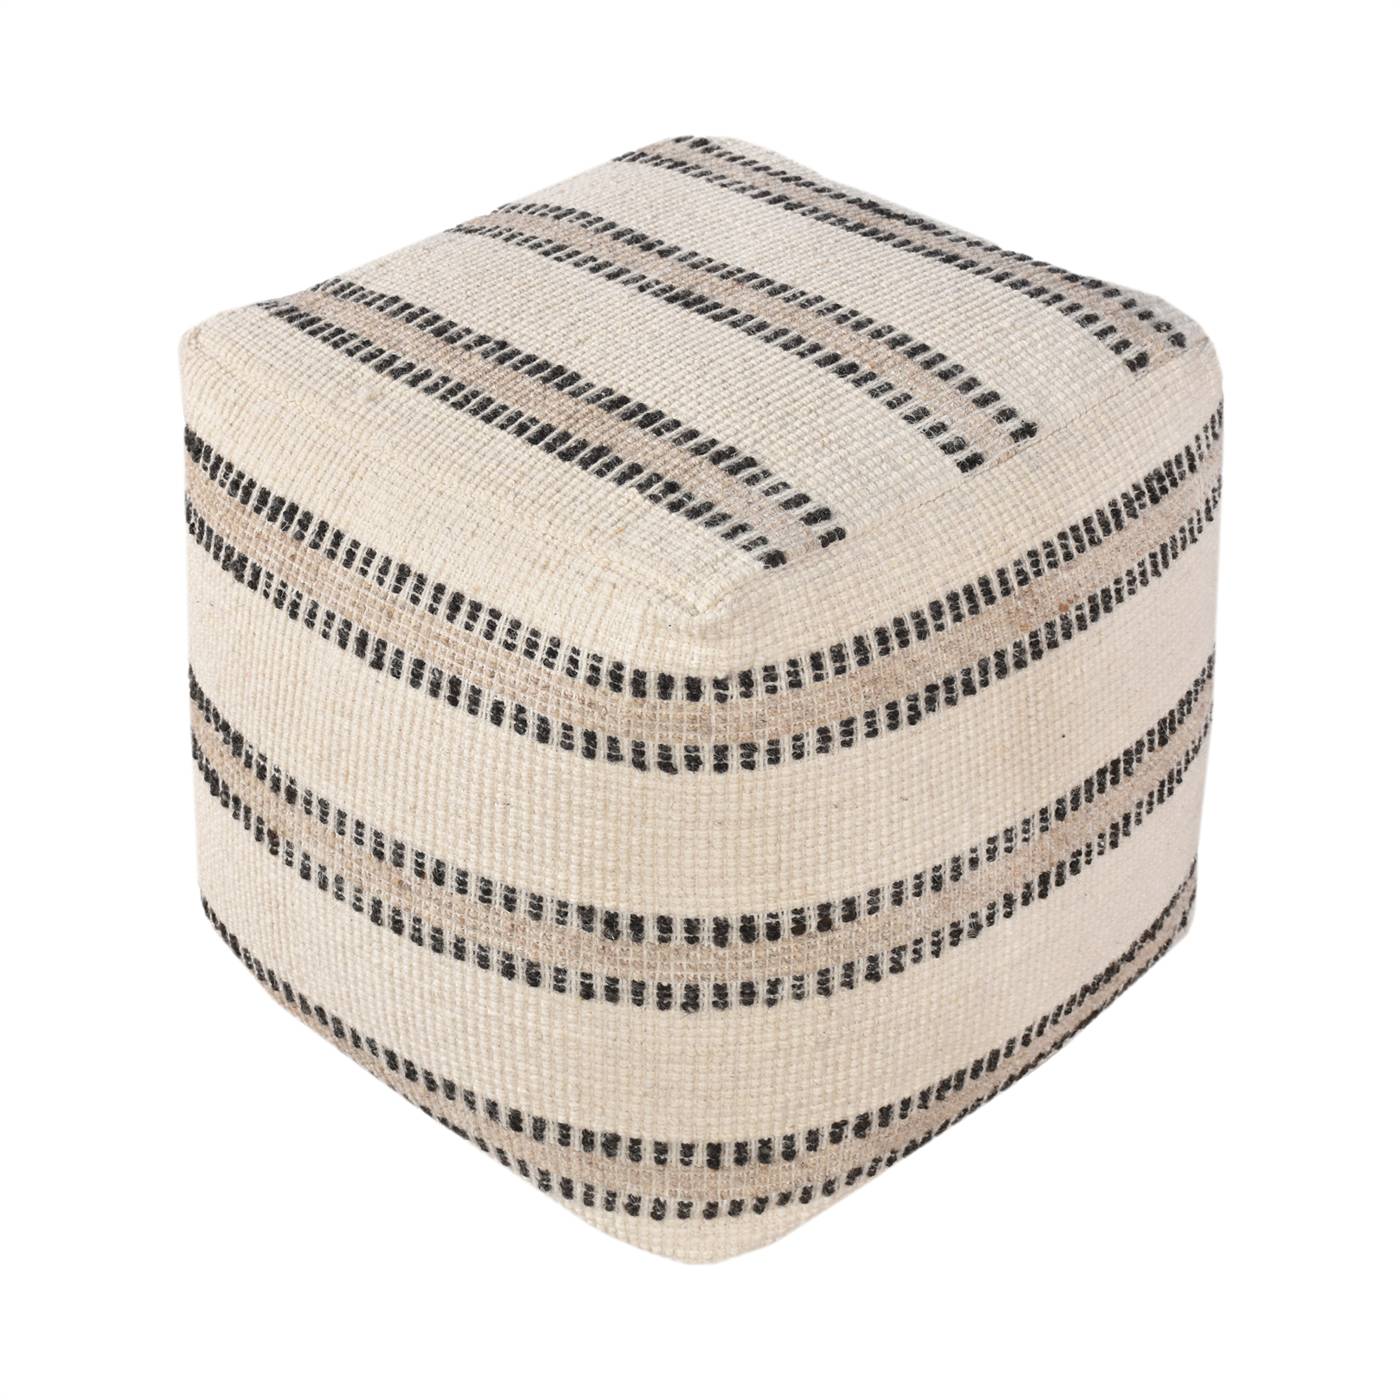 Blavet Pouf, 40x40x40 cm, Natural White, Charcoal, Wool, Hand Woven, Handwoven, All Loop